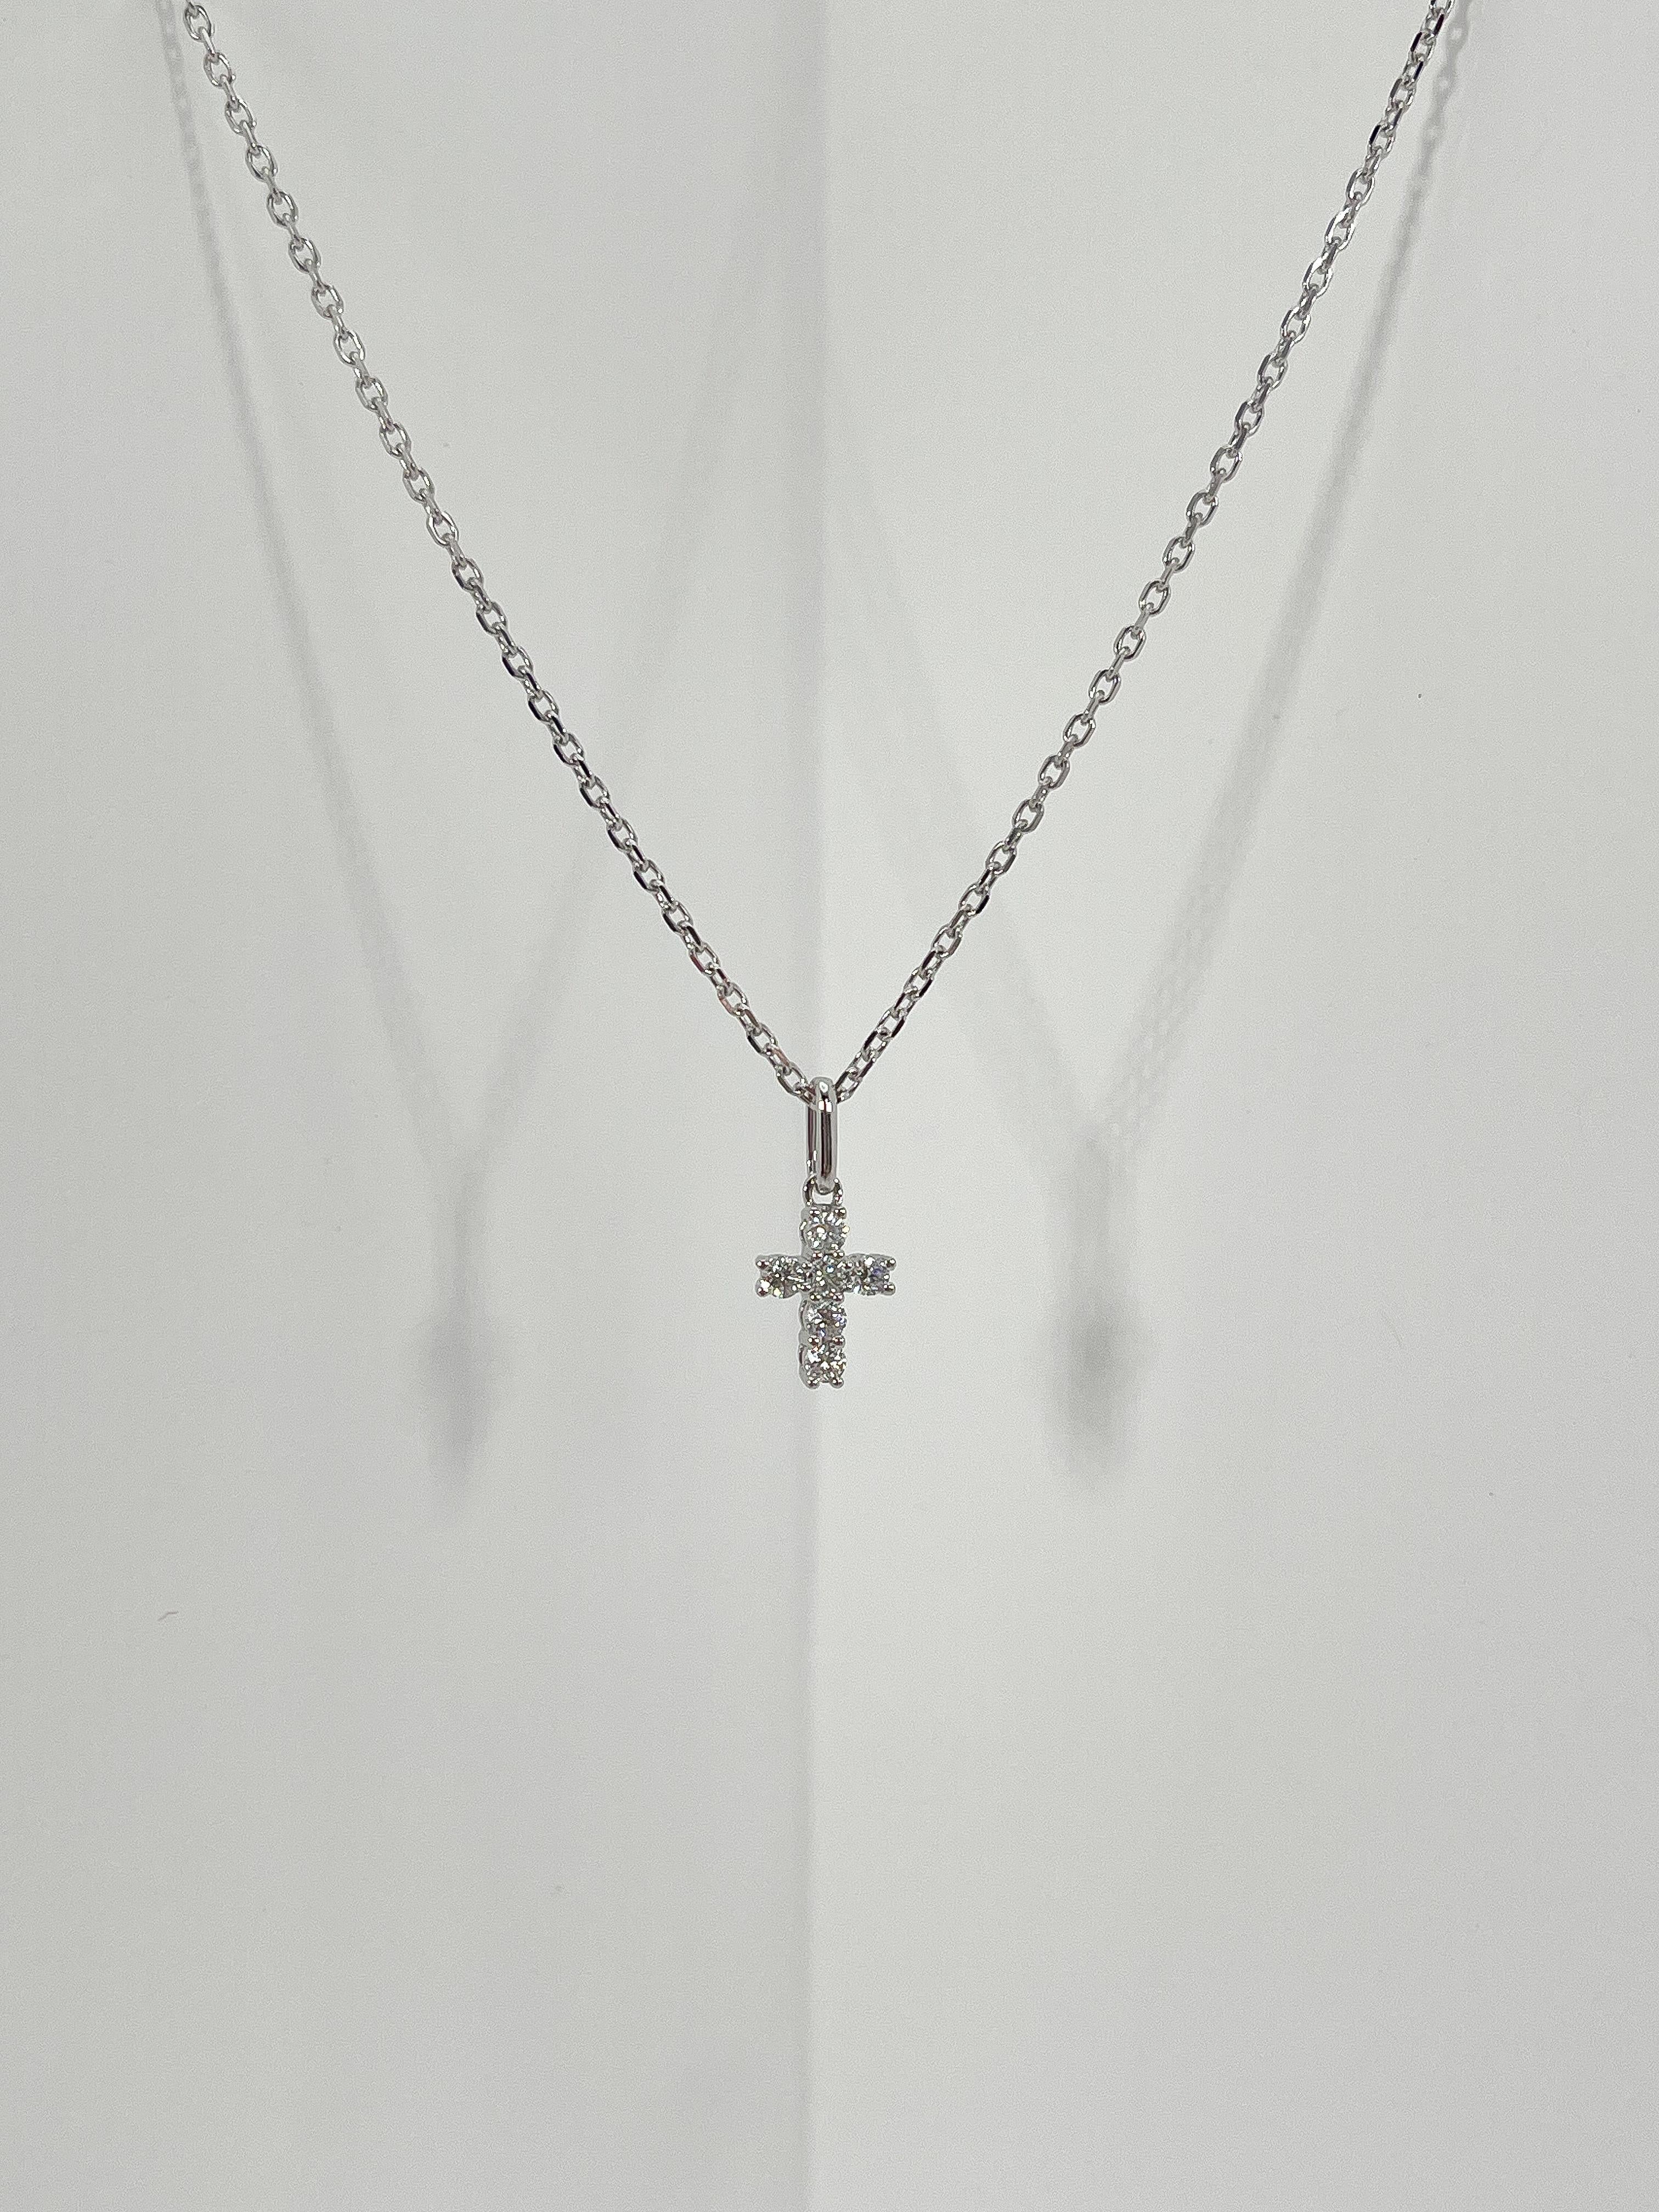 18K white gold .20 CTW diamond cross necklace. The diamonds in the pendant are all round, the pendant measures to be 8.5mm x 6.5mm, has a lobster clasp to open and close, pendant comes on an 18-inch diamond cut cable chain, and has a total weight of